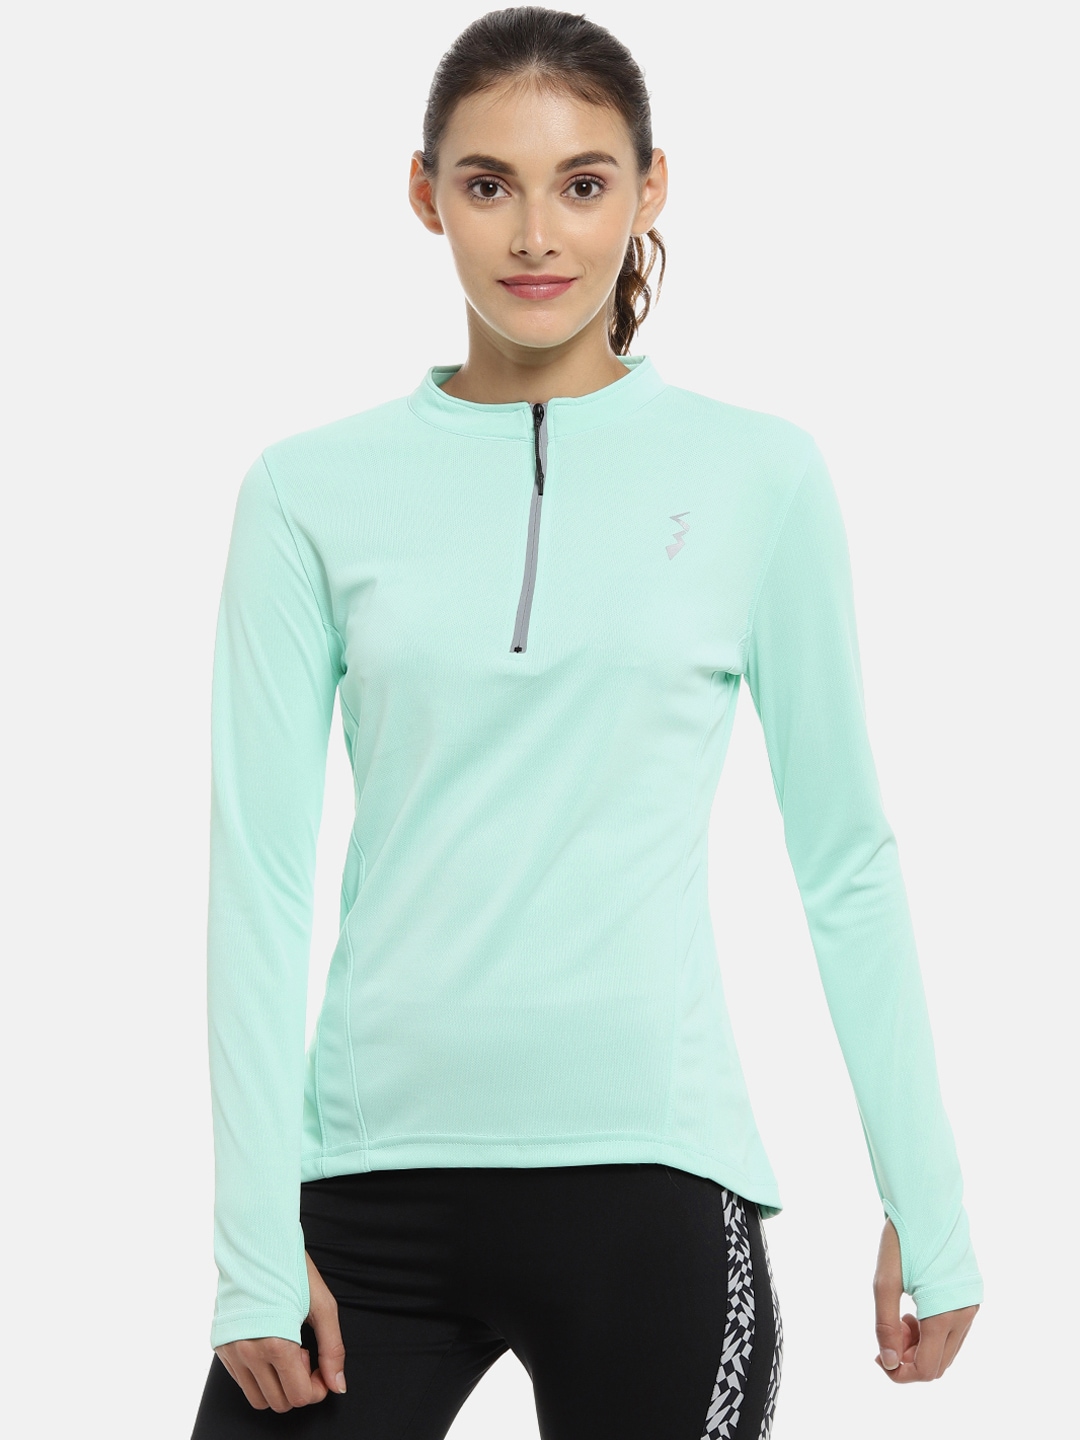 Campus Sutra Women Sea Green Solid High Neck T-shirt Price in India